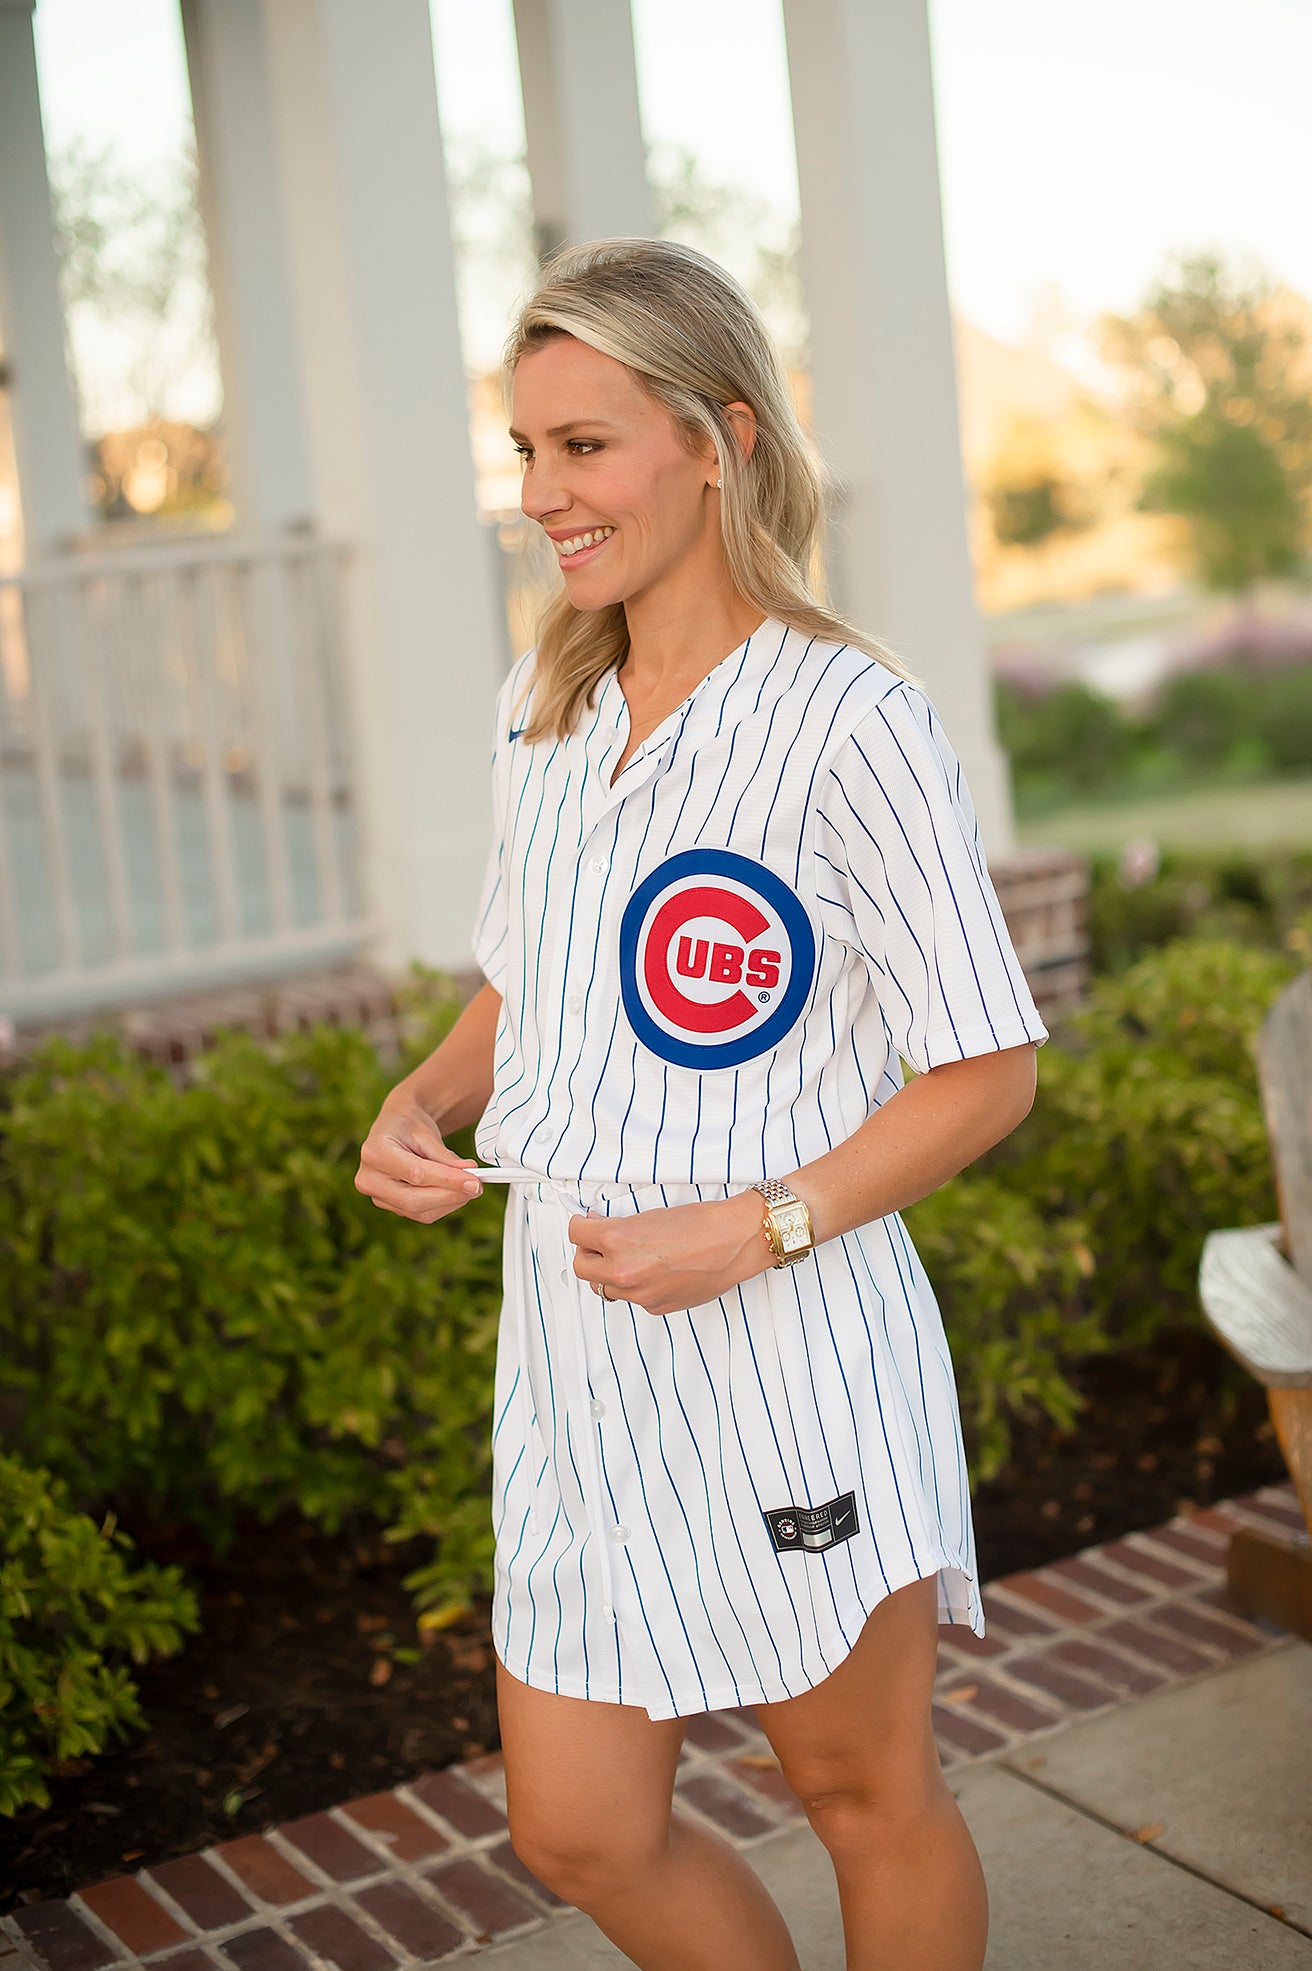 Official Women's Chicago Cubs Gear, Womens Cubs Apparel, Ladies Cubs  Outfits